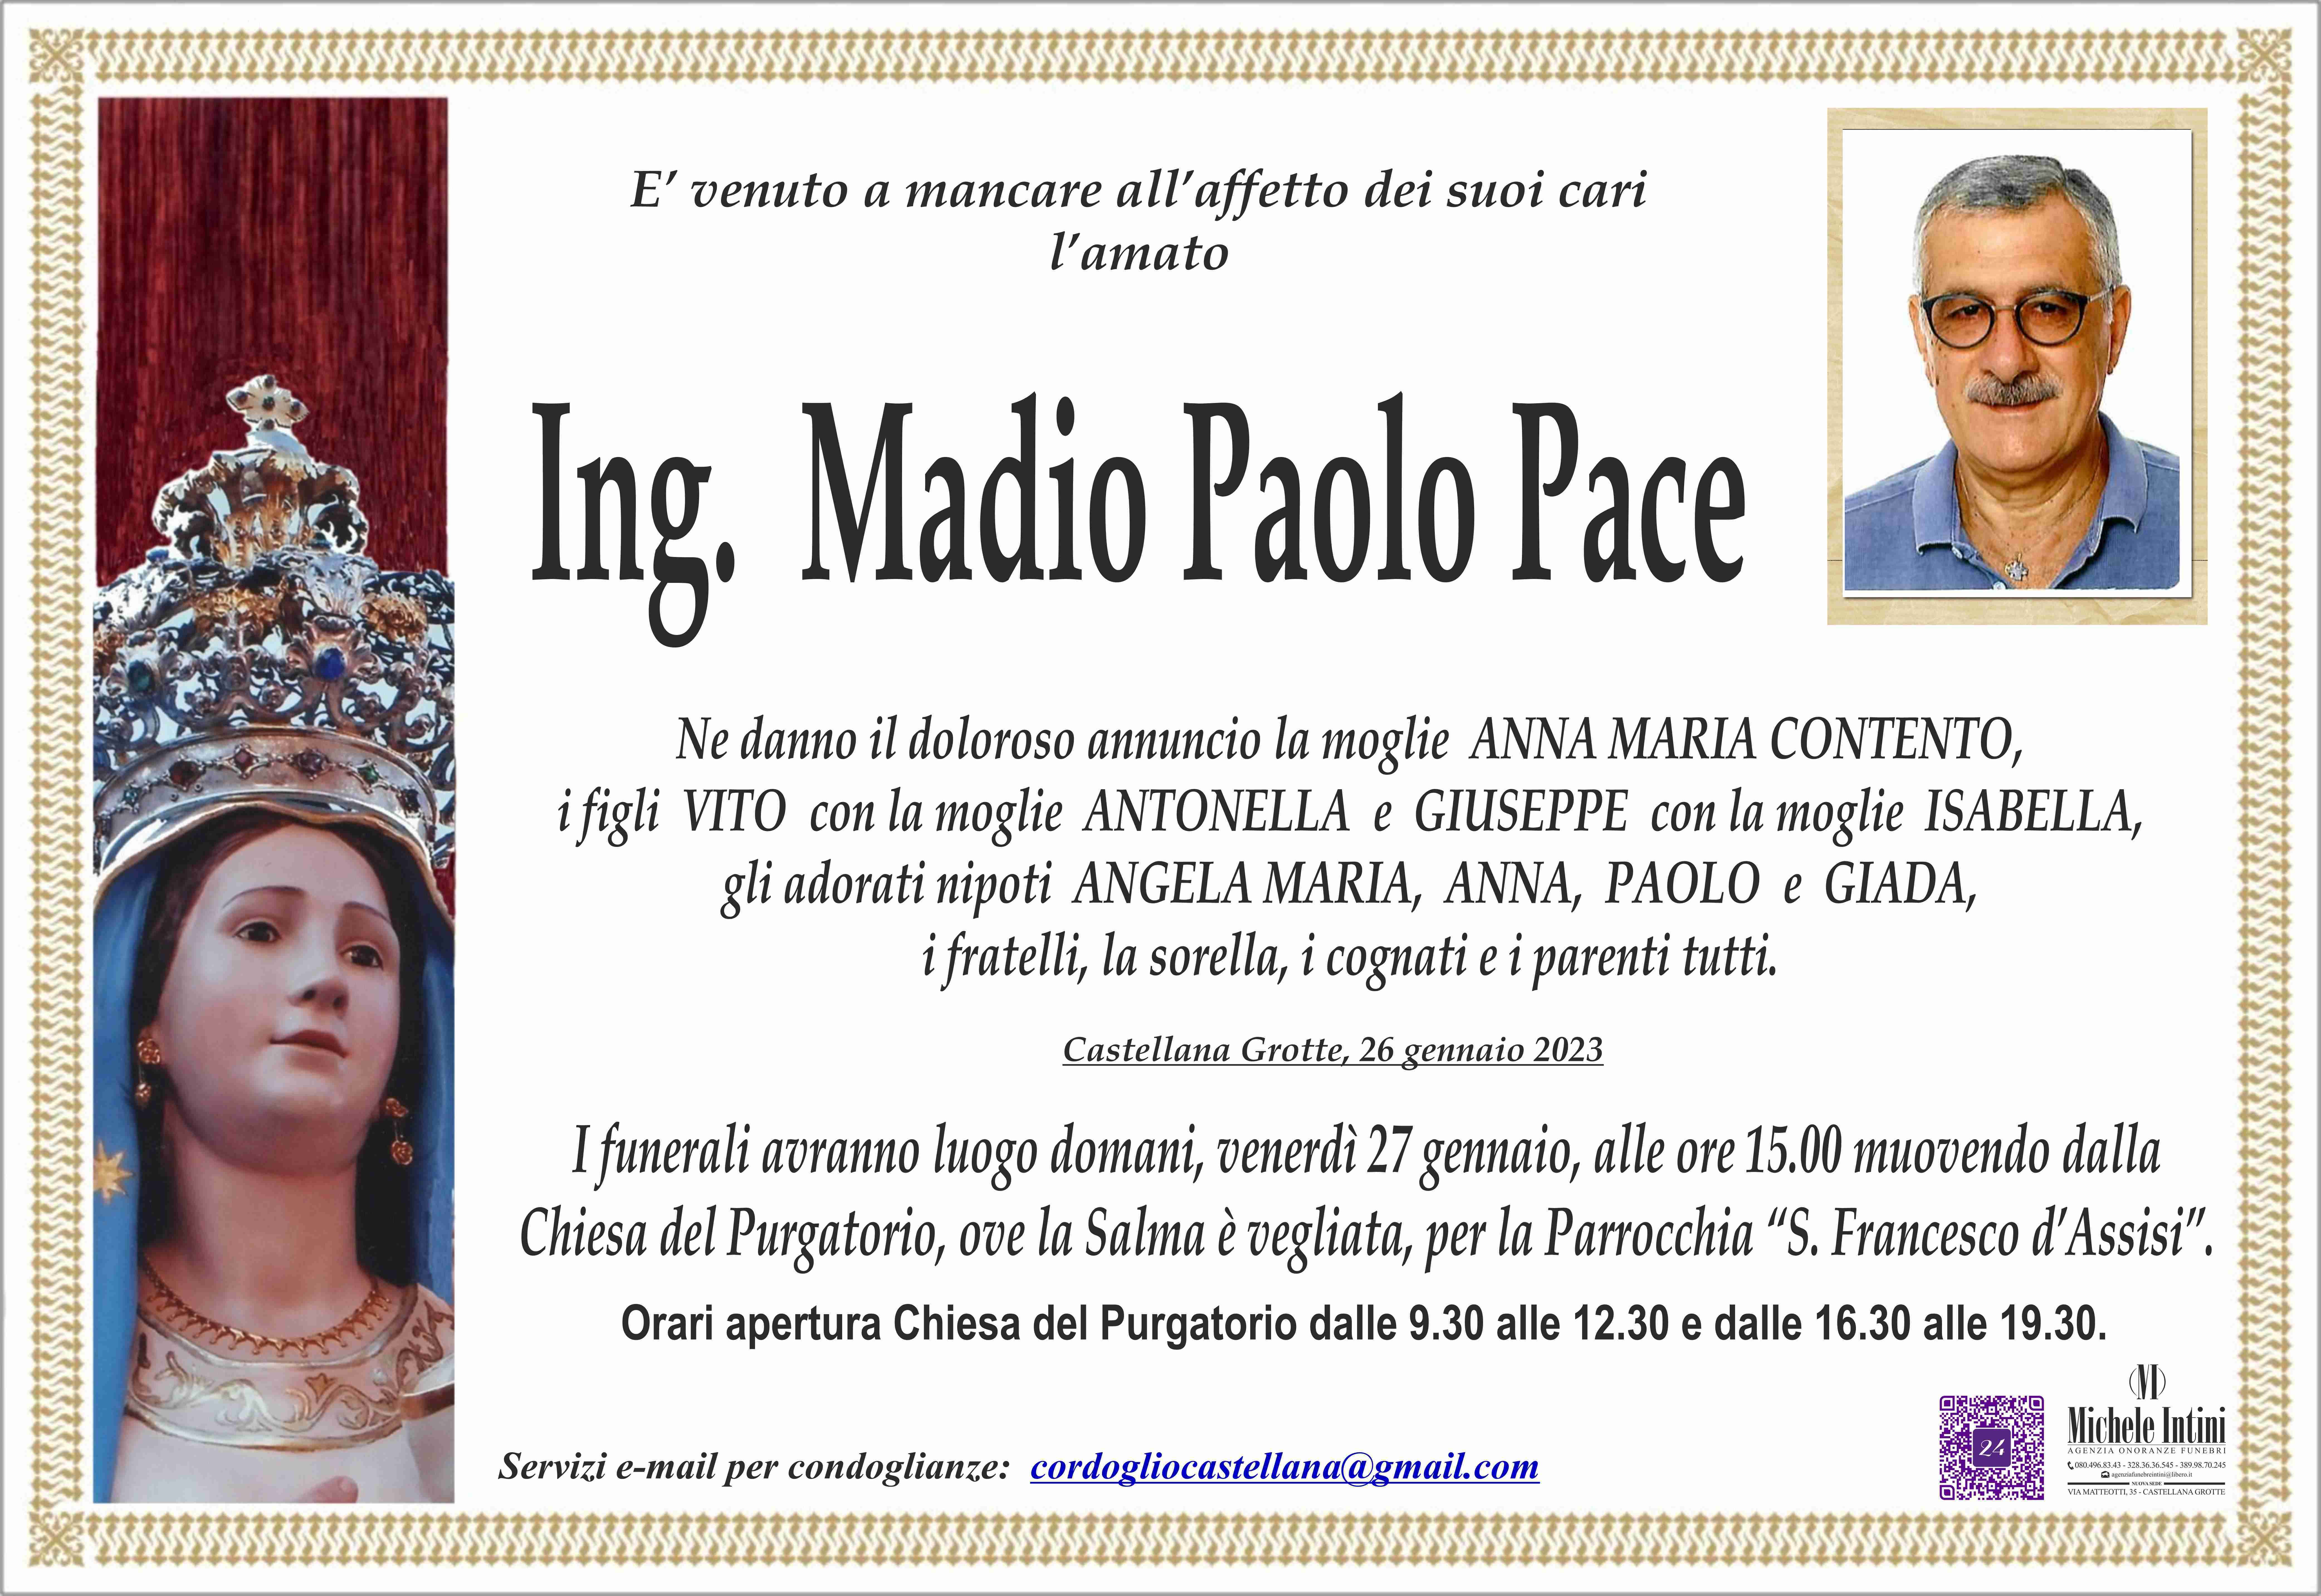 Madio Paolo Pace